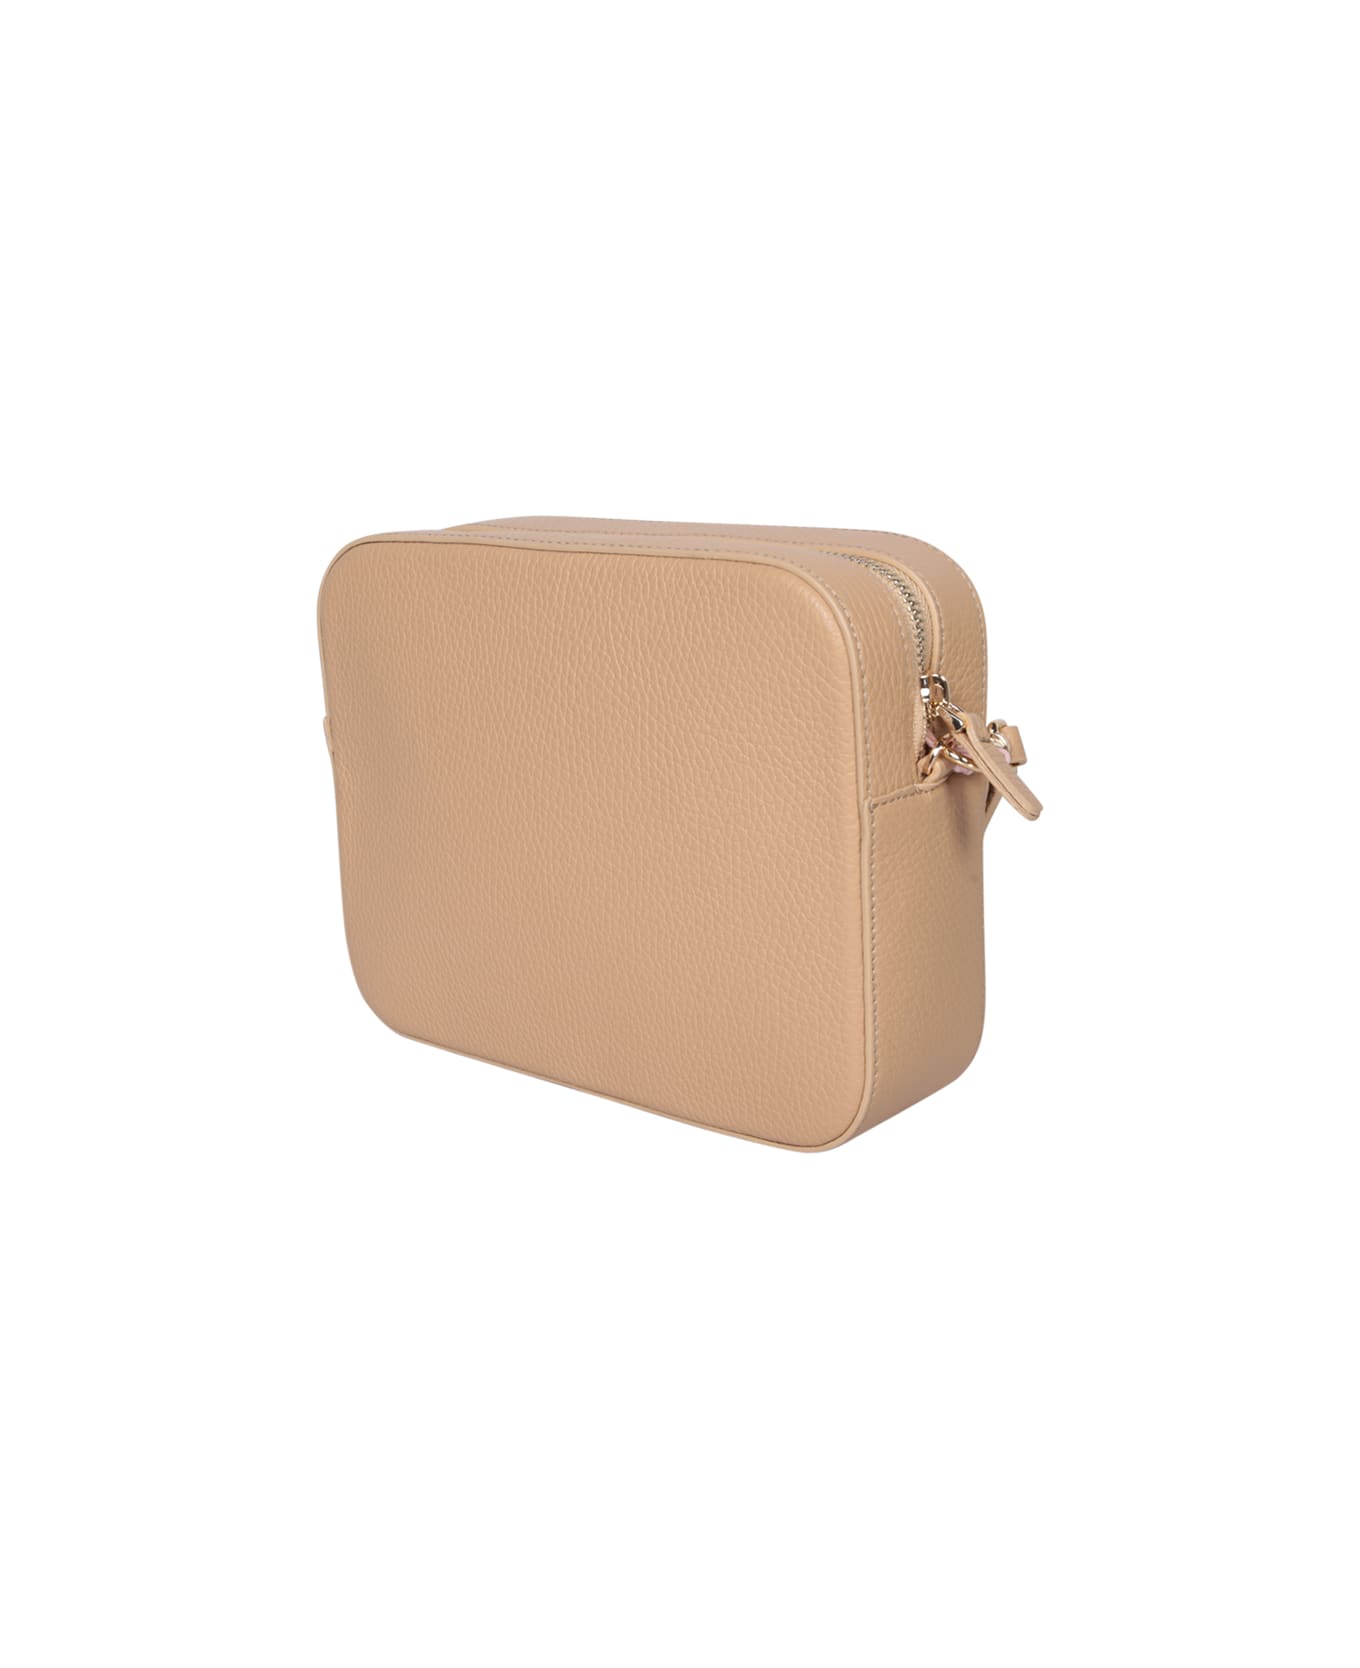 Coccinelle Tebe Small Beige Bag - Beige